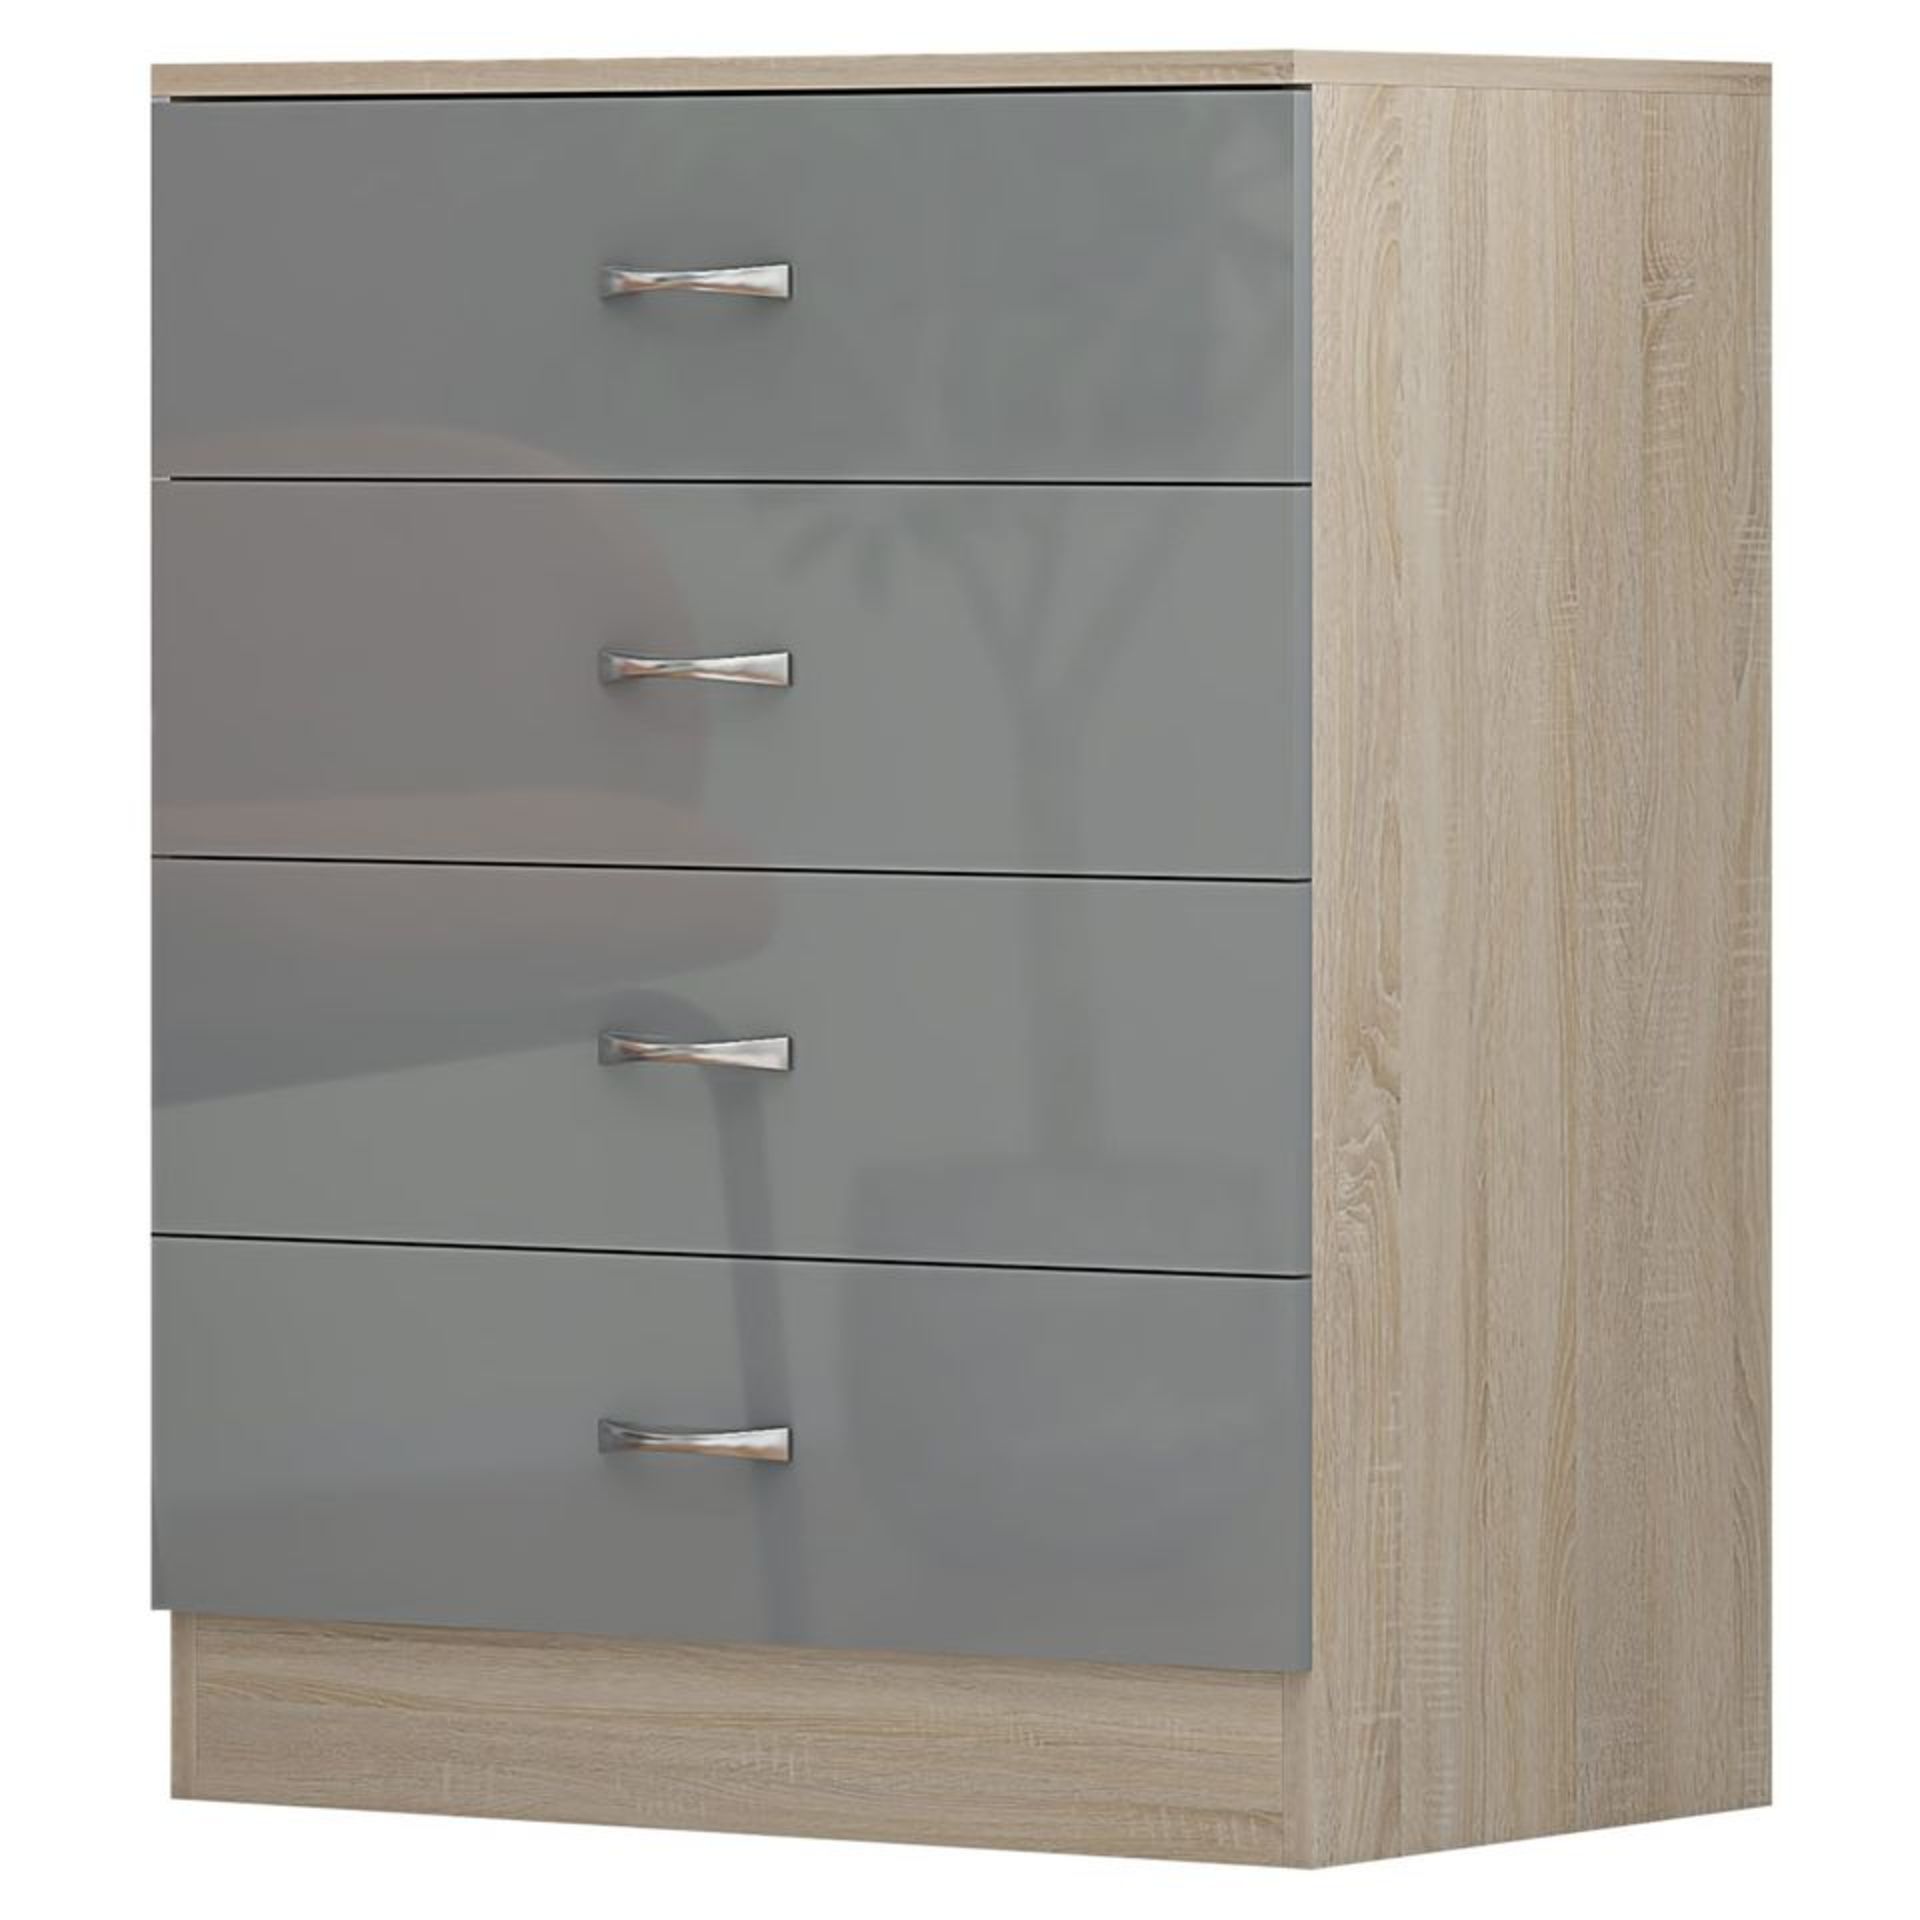 10 X 4 DRAWER CHESTS - HIGH GLOSS GREY ON SONOMA OAK FRAME BRAND NEW BOXED - The 4 drawer chest is - Image 2 of 3